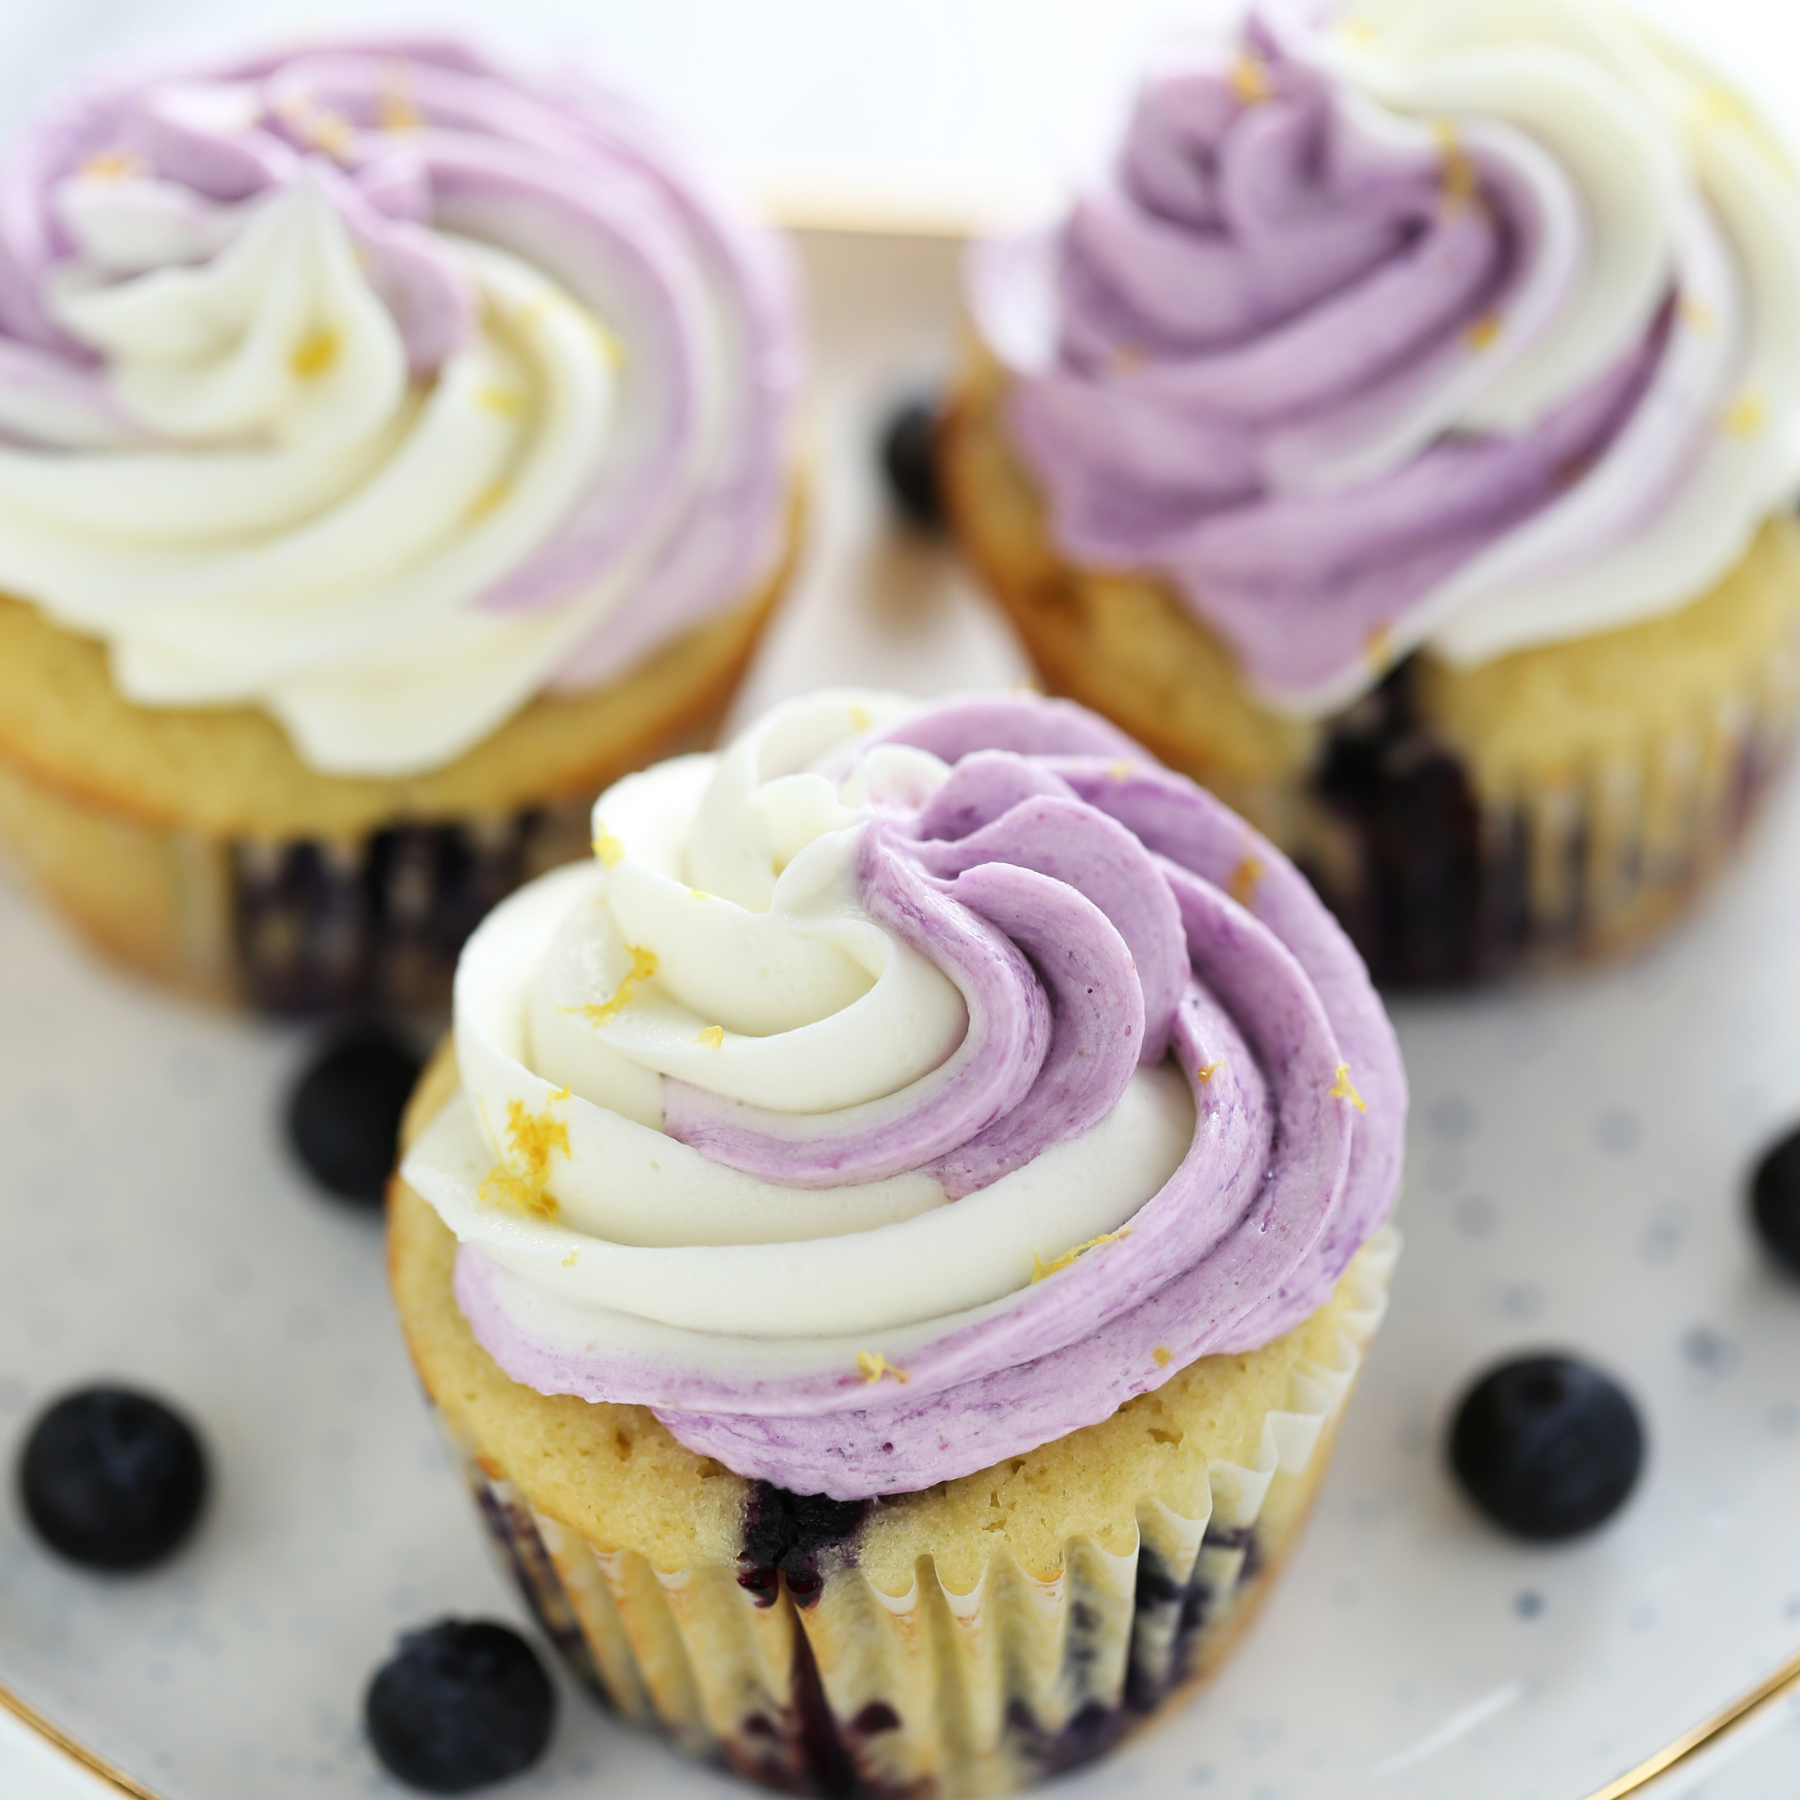 three lemon blueberry cupcakes on a platter, with a few fresh blueberries scattered, ready to serve.